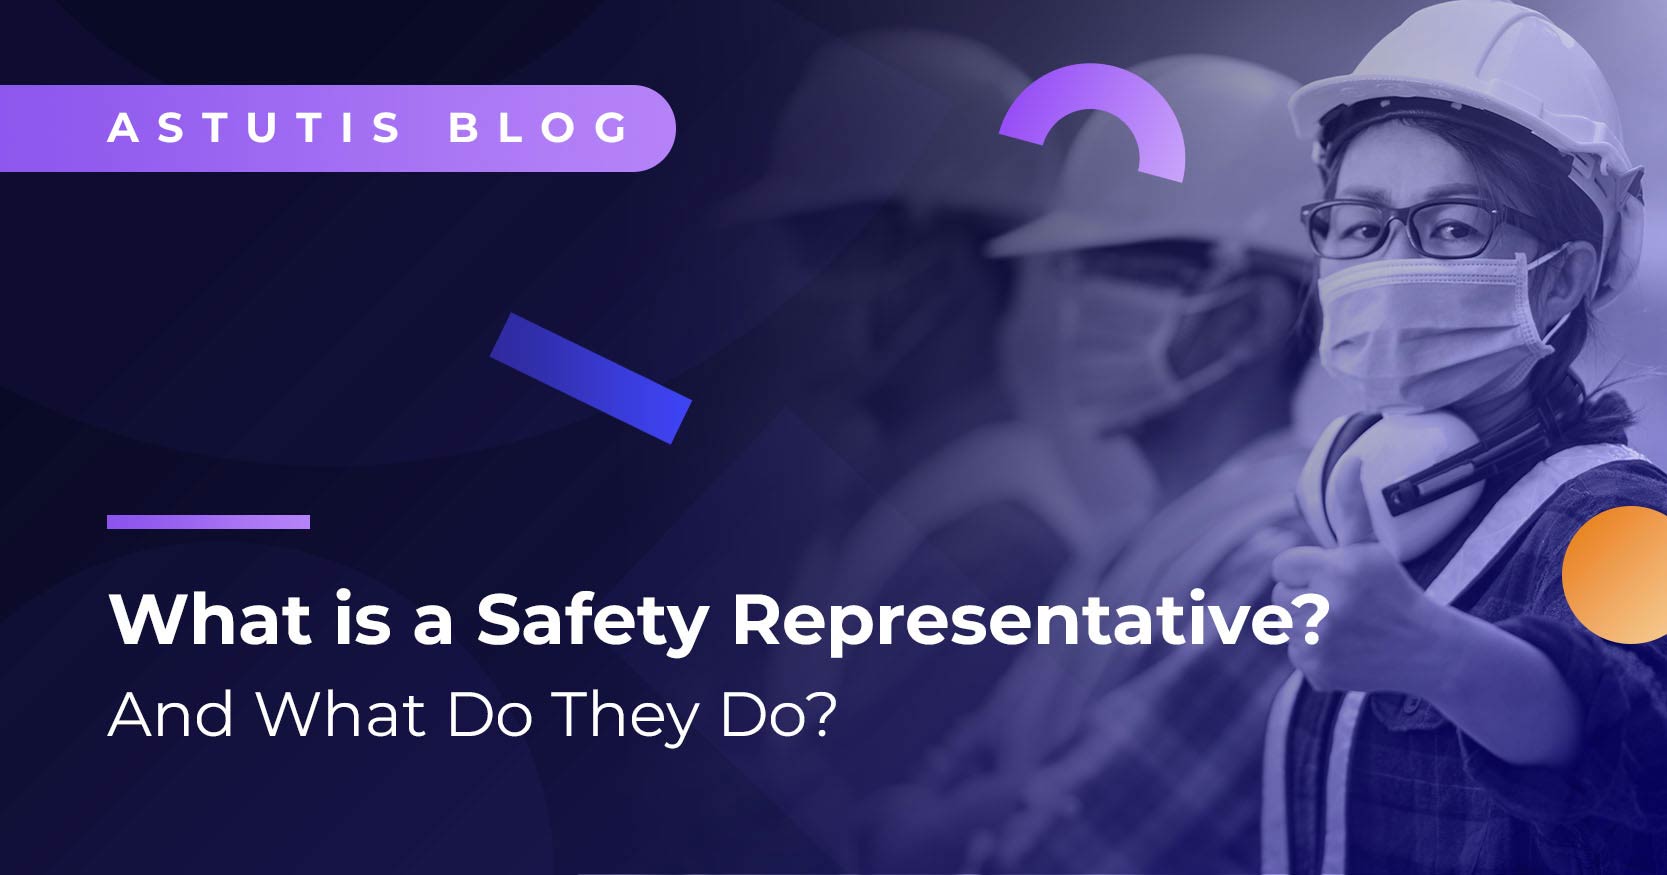 What Is a Safety Representative? And What Do They Do? Image